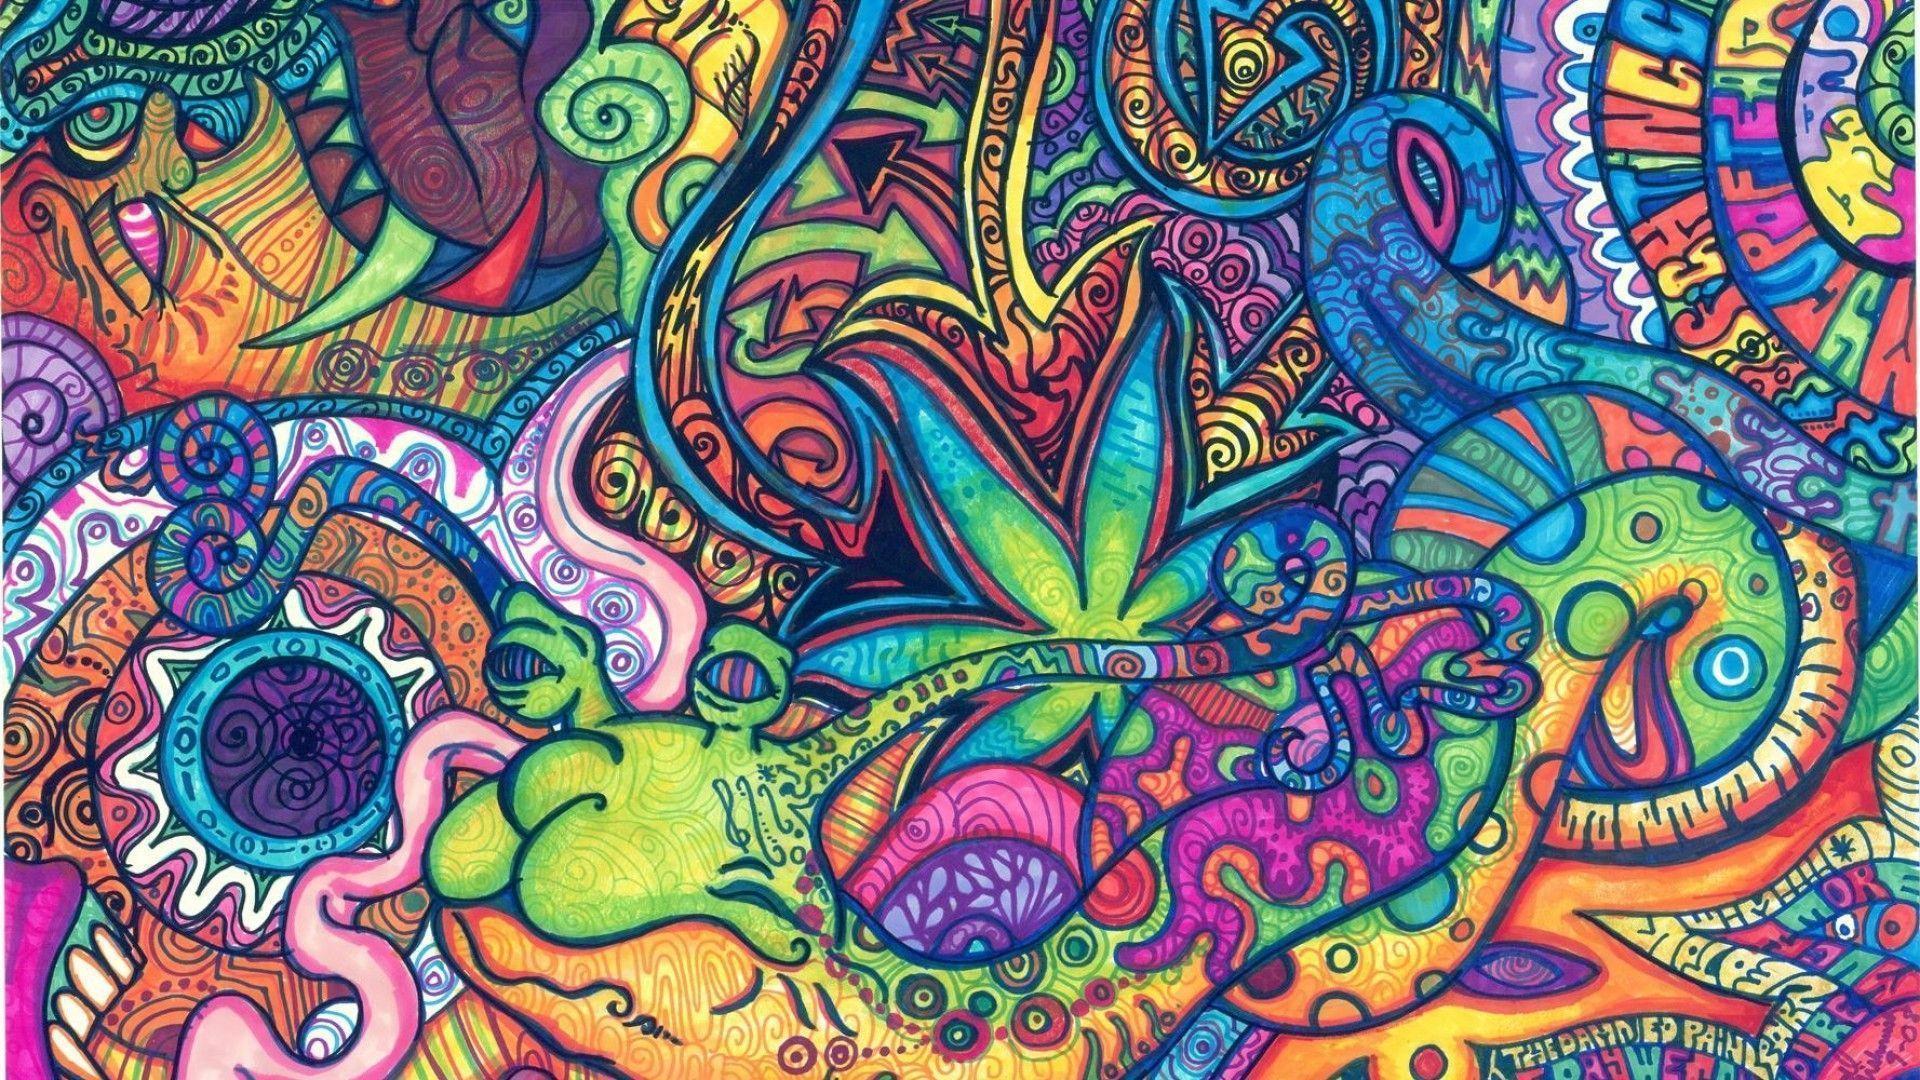 Trippy Wallpaper 1920 X 1200: Pix For Gt Psychedelic Trippy